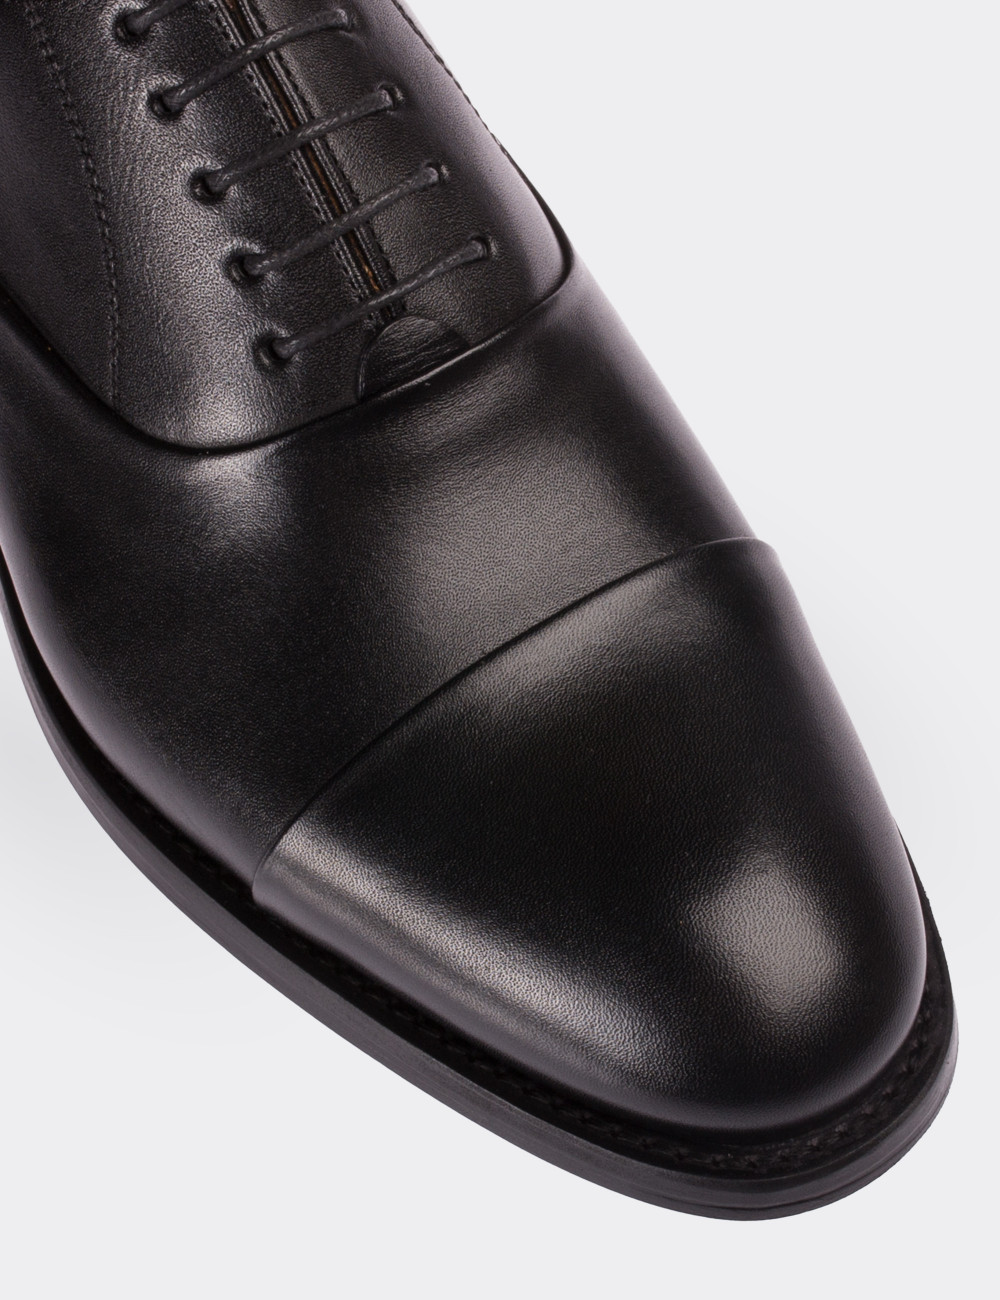 Black Calfskin Leather Classic Shoes 